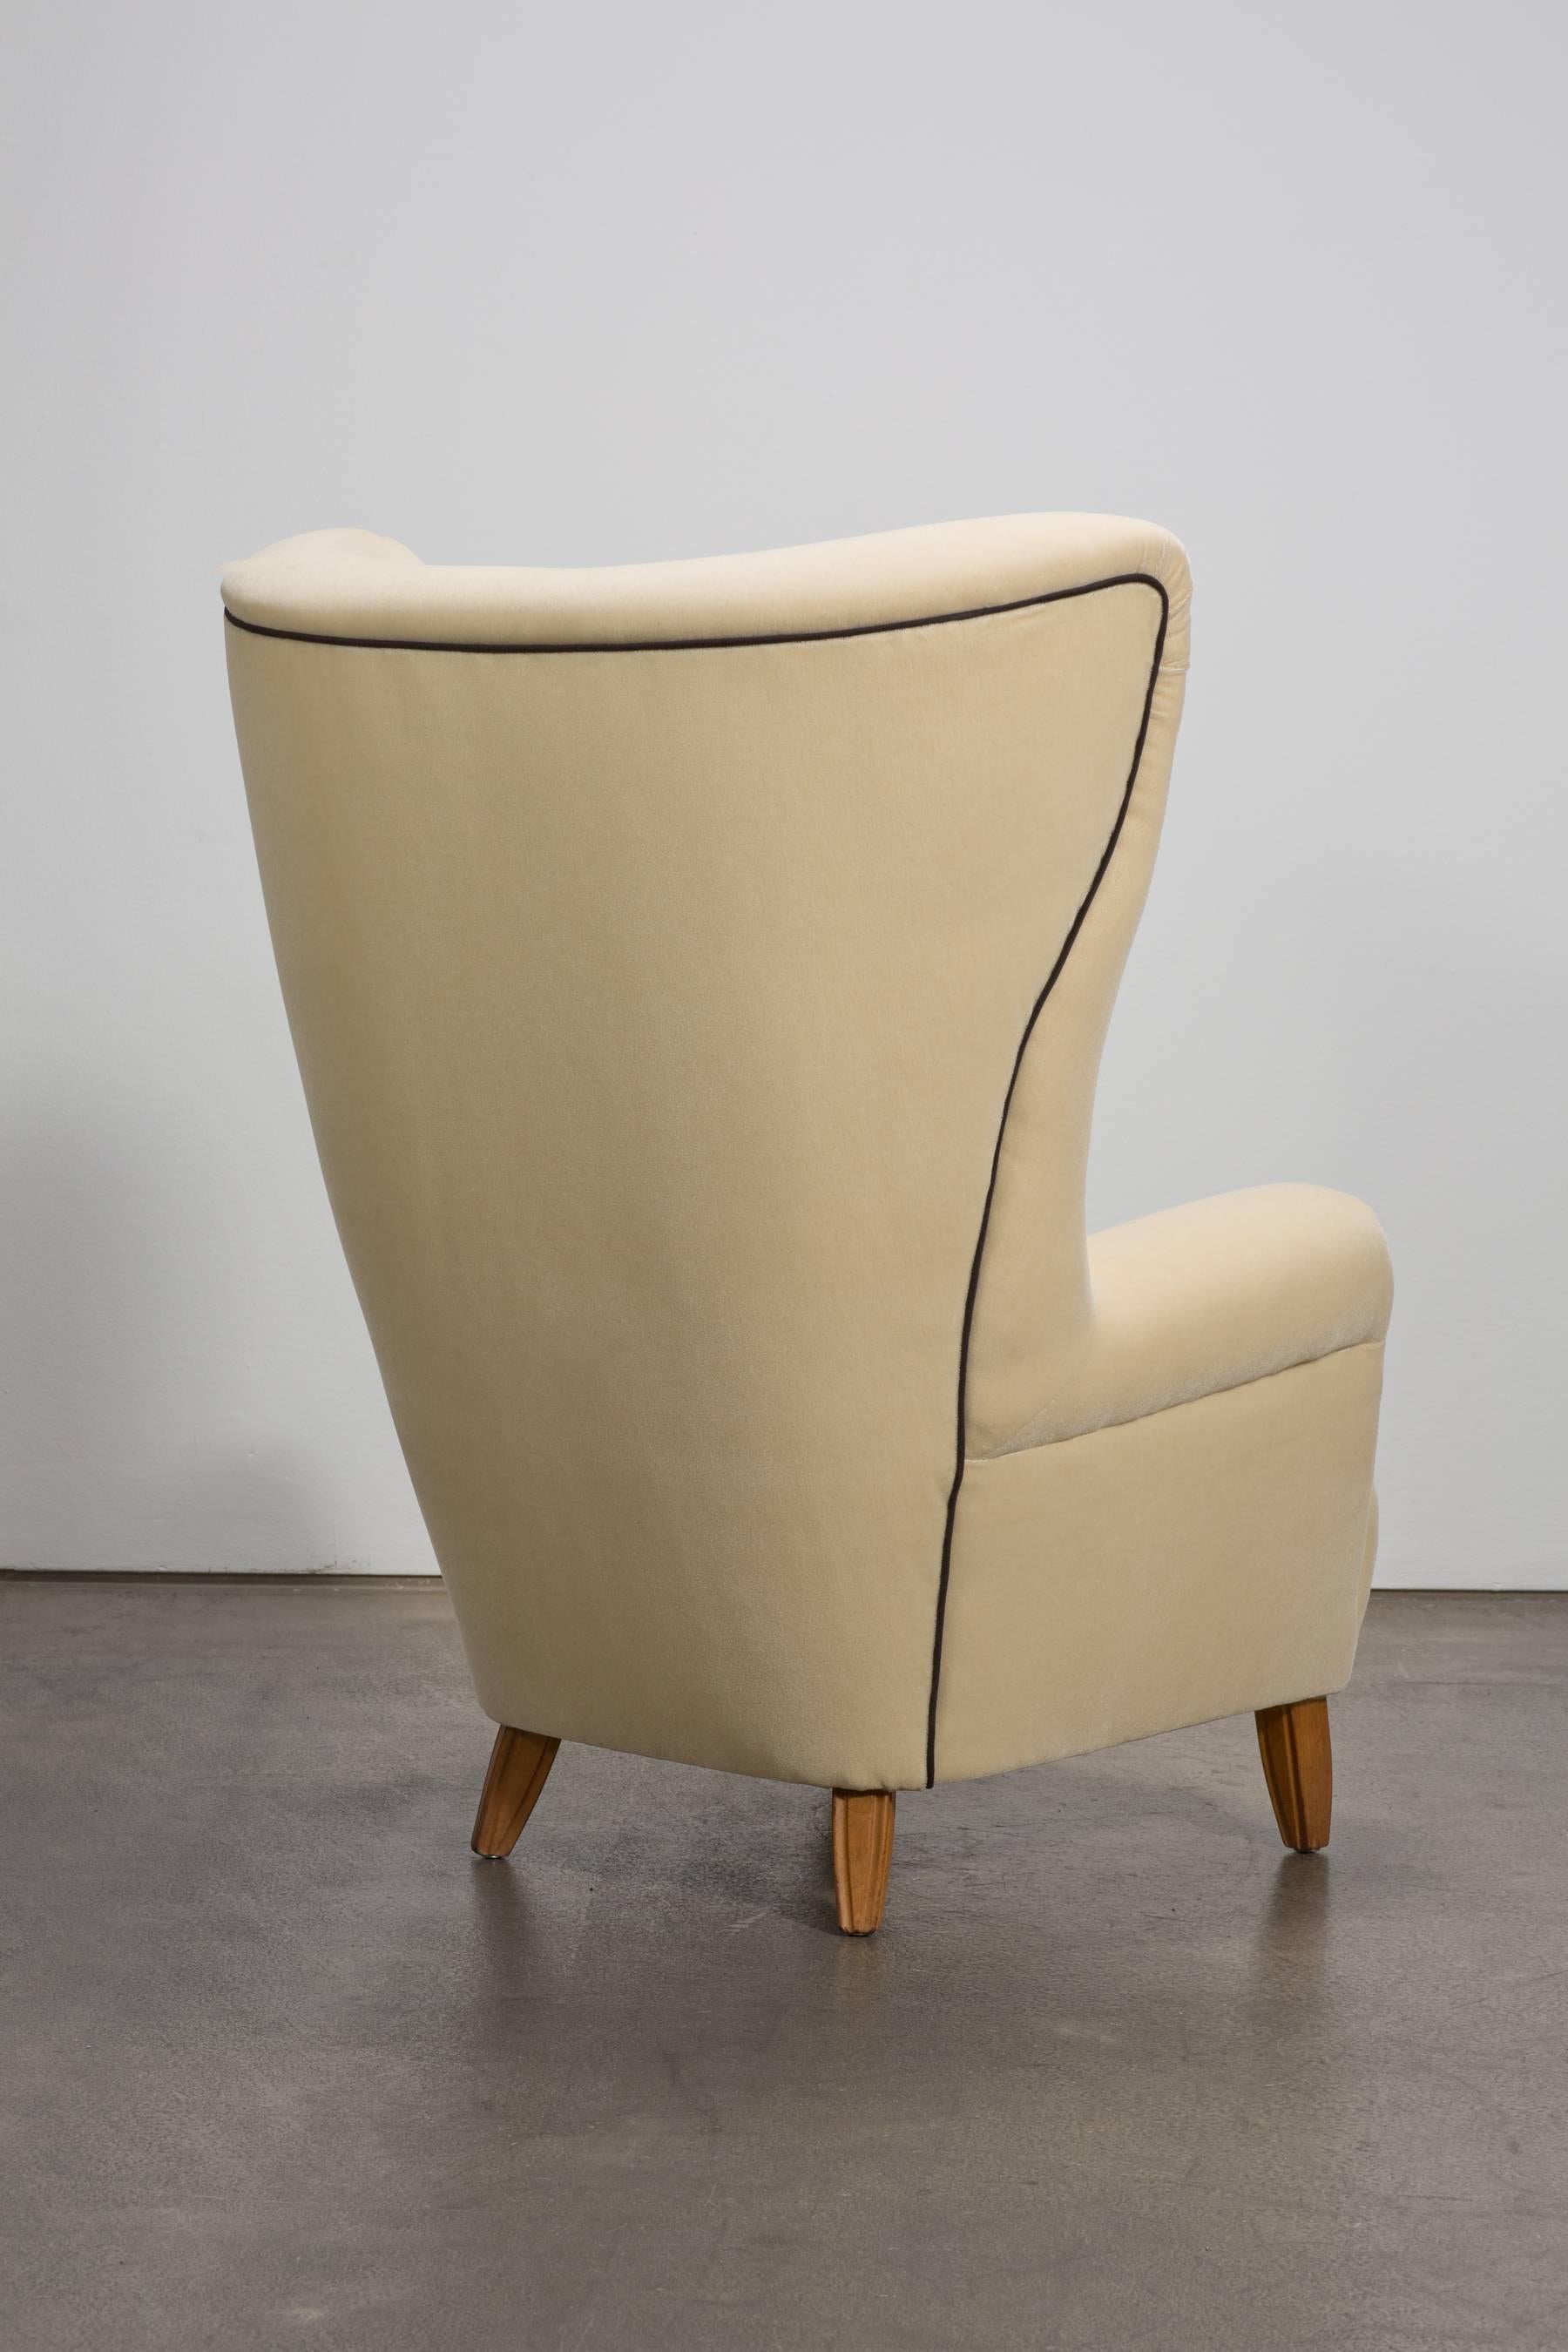 Contemporary Made to Order Gio Ponti Style Mid-Century Elephant Wingback Armchair and Stool For Sale